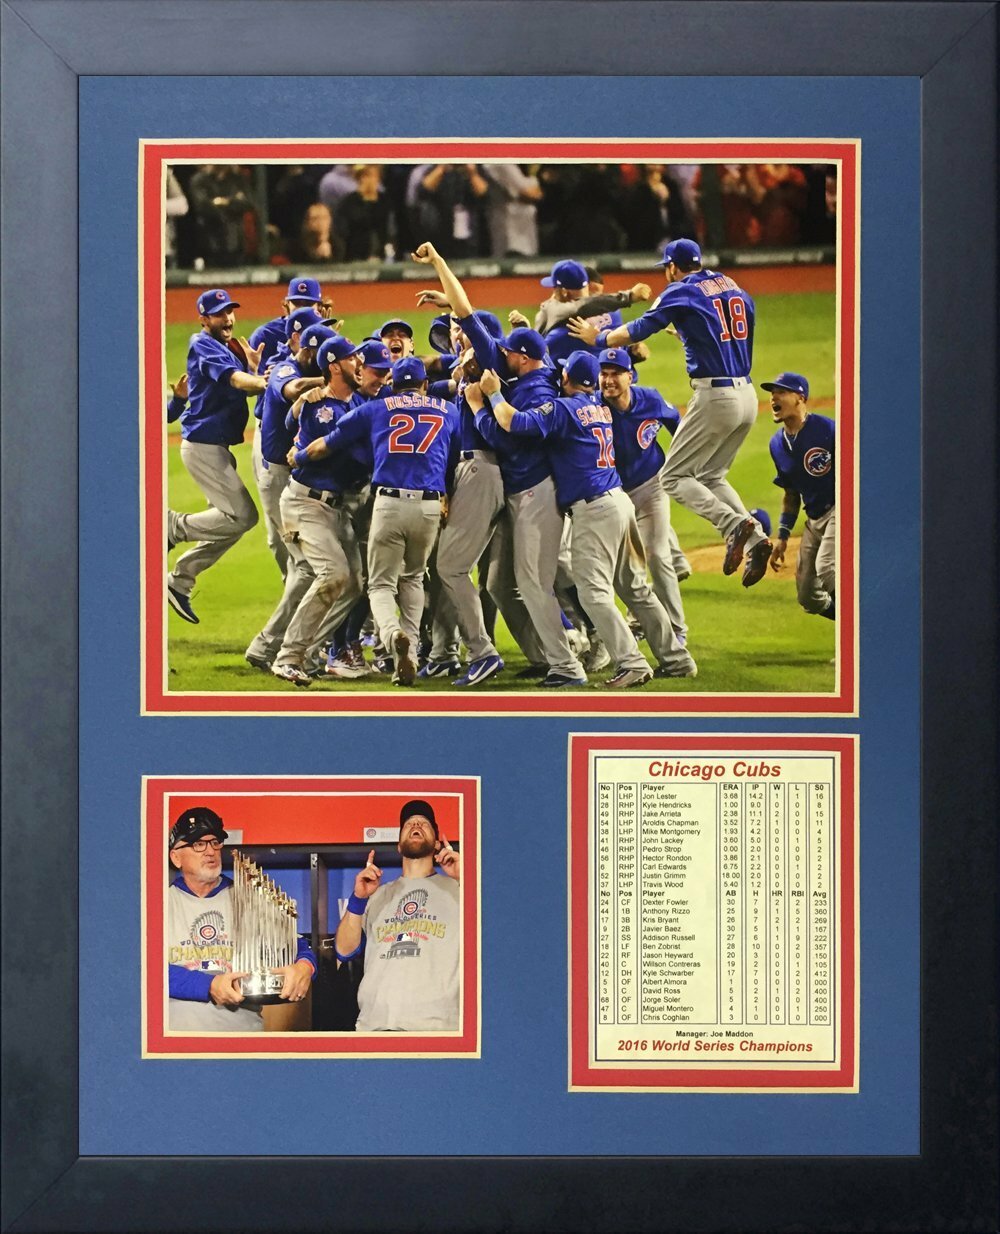 Chicago Cubs 12'' x 16'' Personalized Team Jersey Print